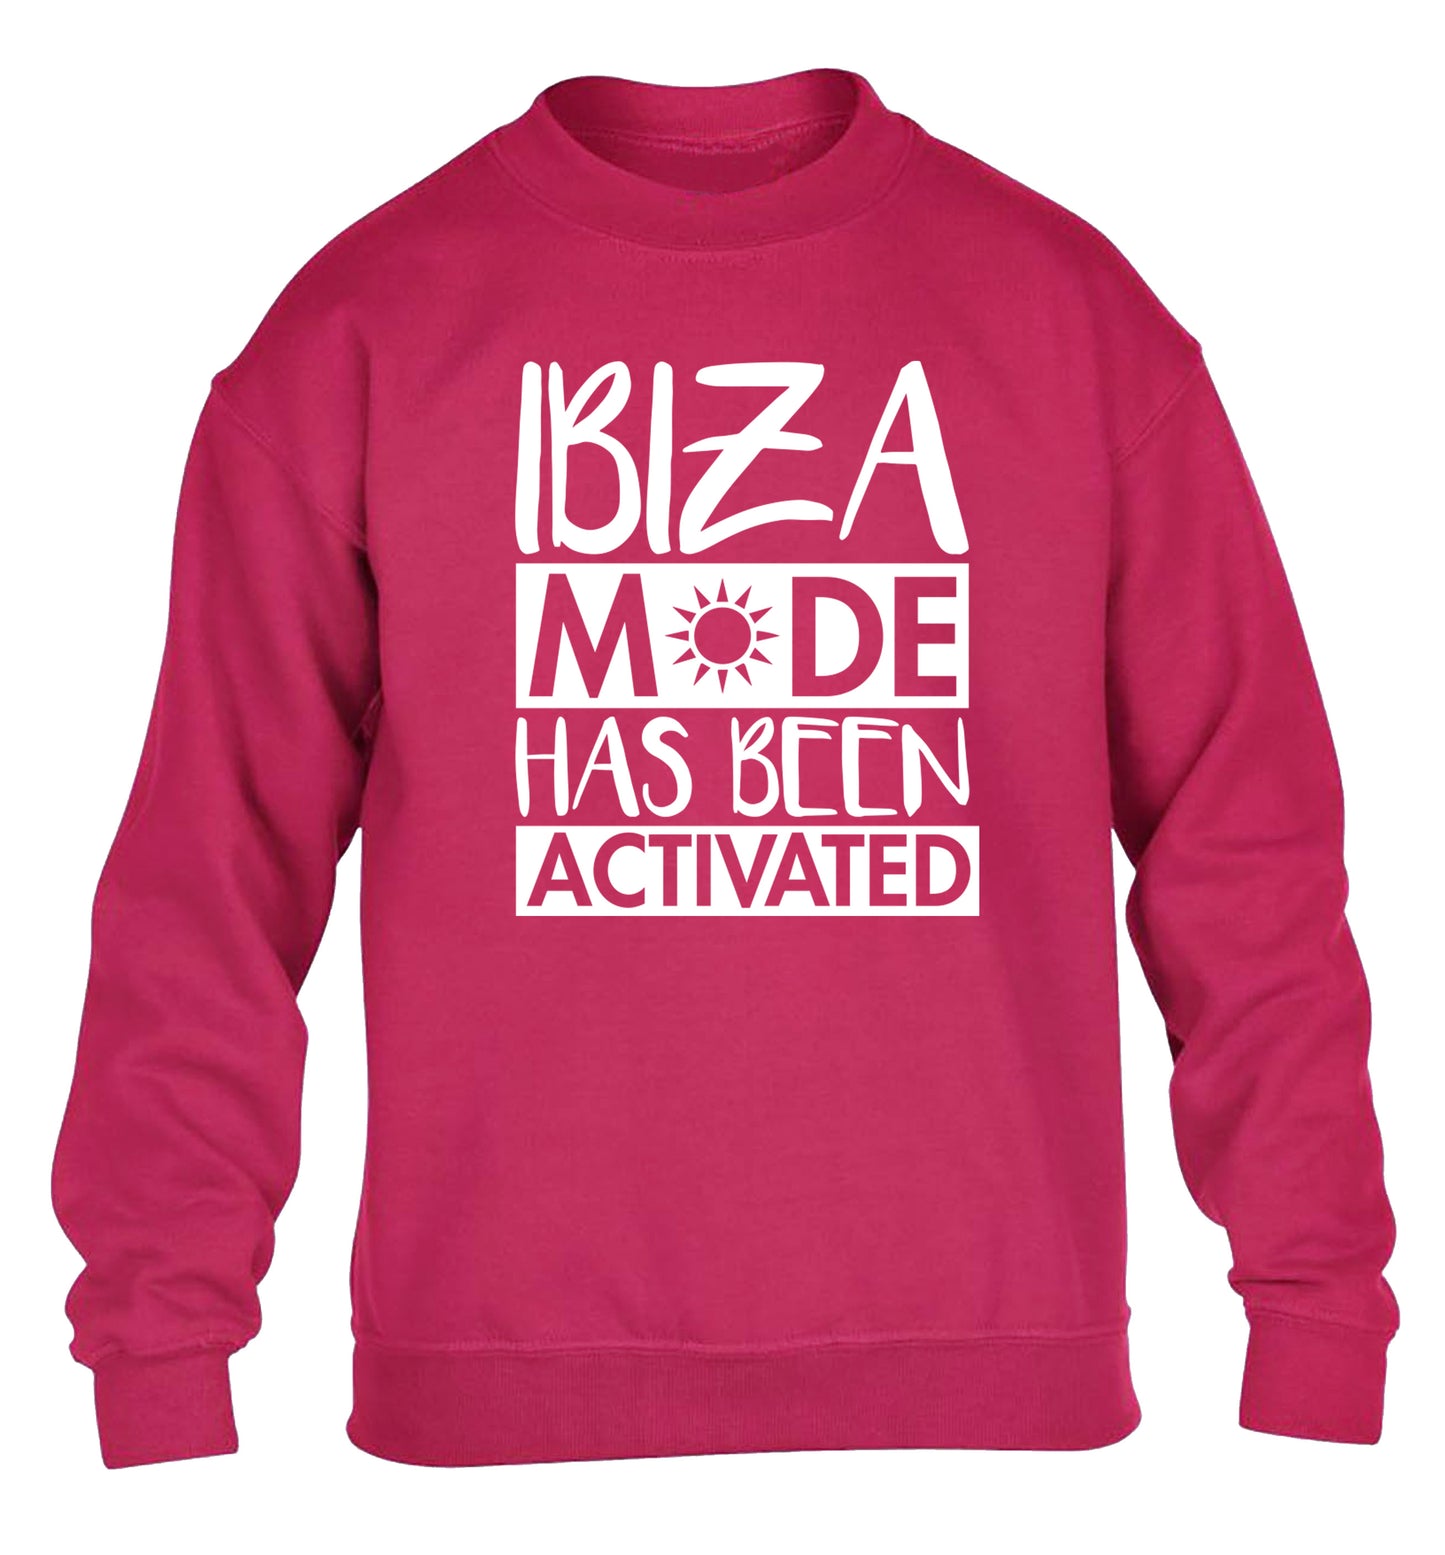 Ibiza mode has been activated children's pink sweater 12-13 Years